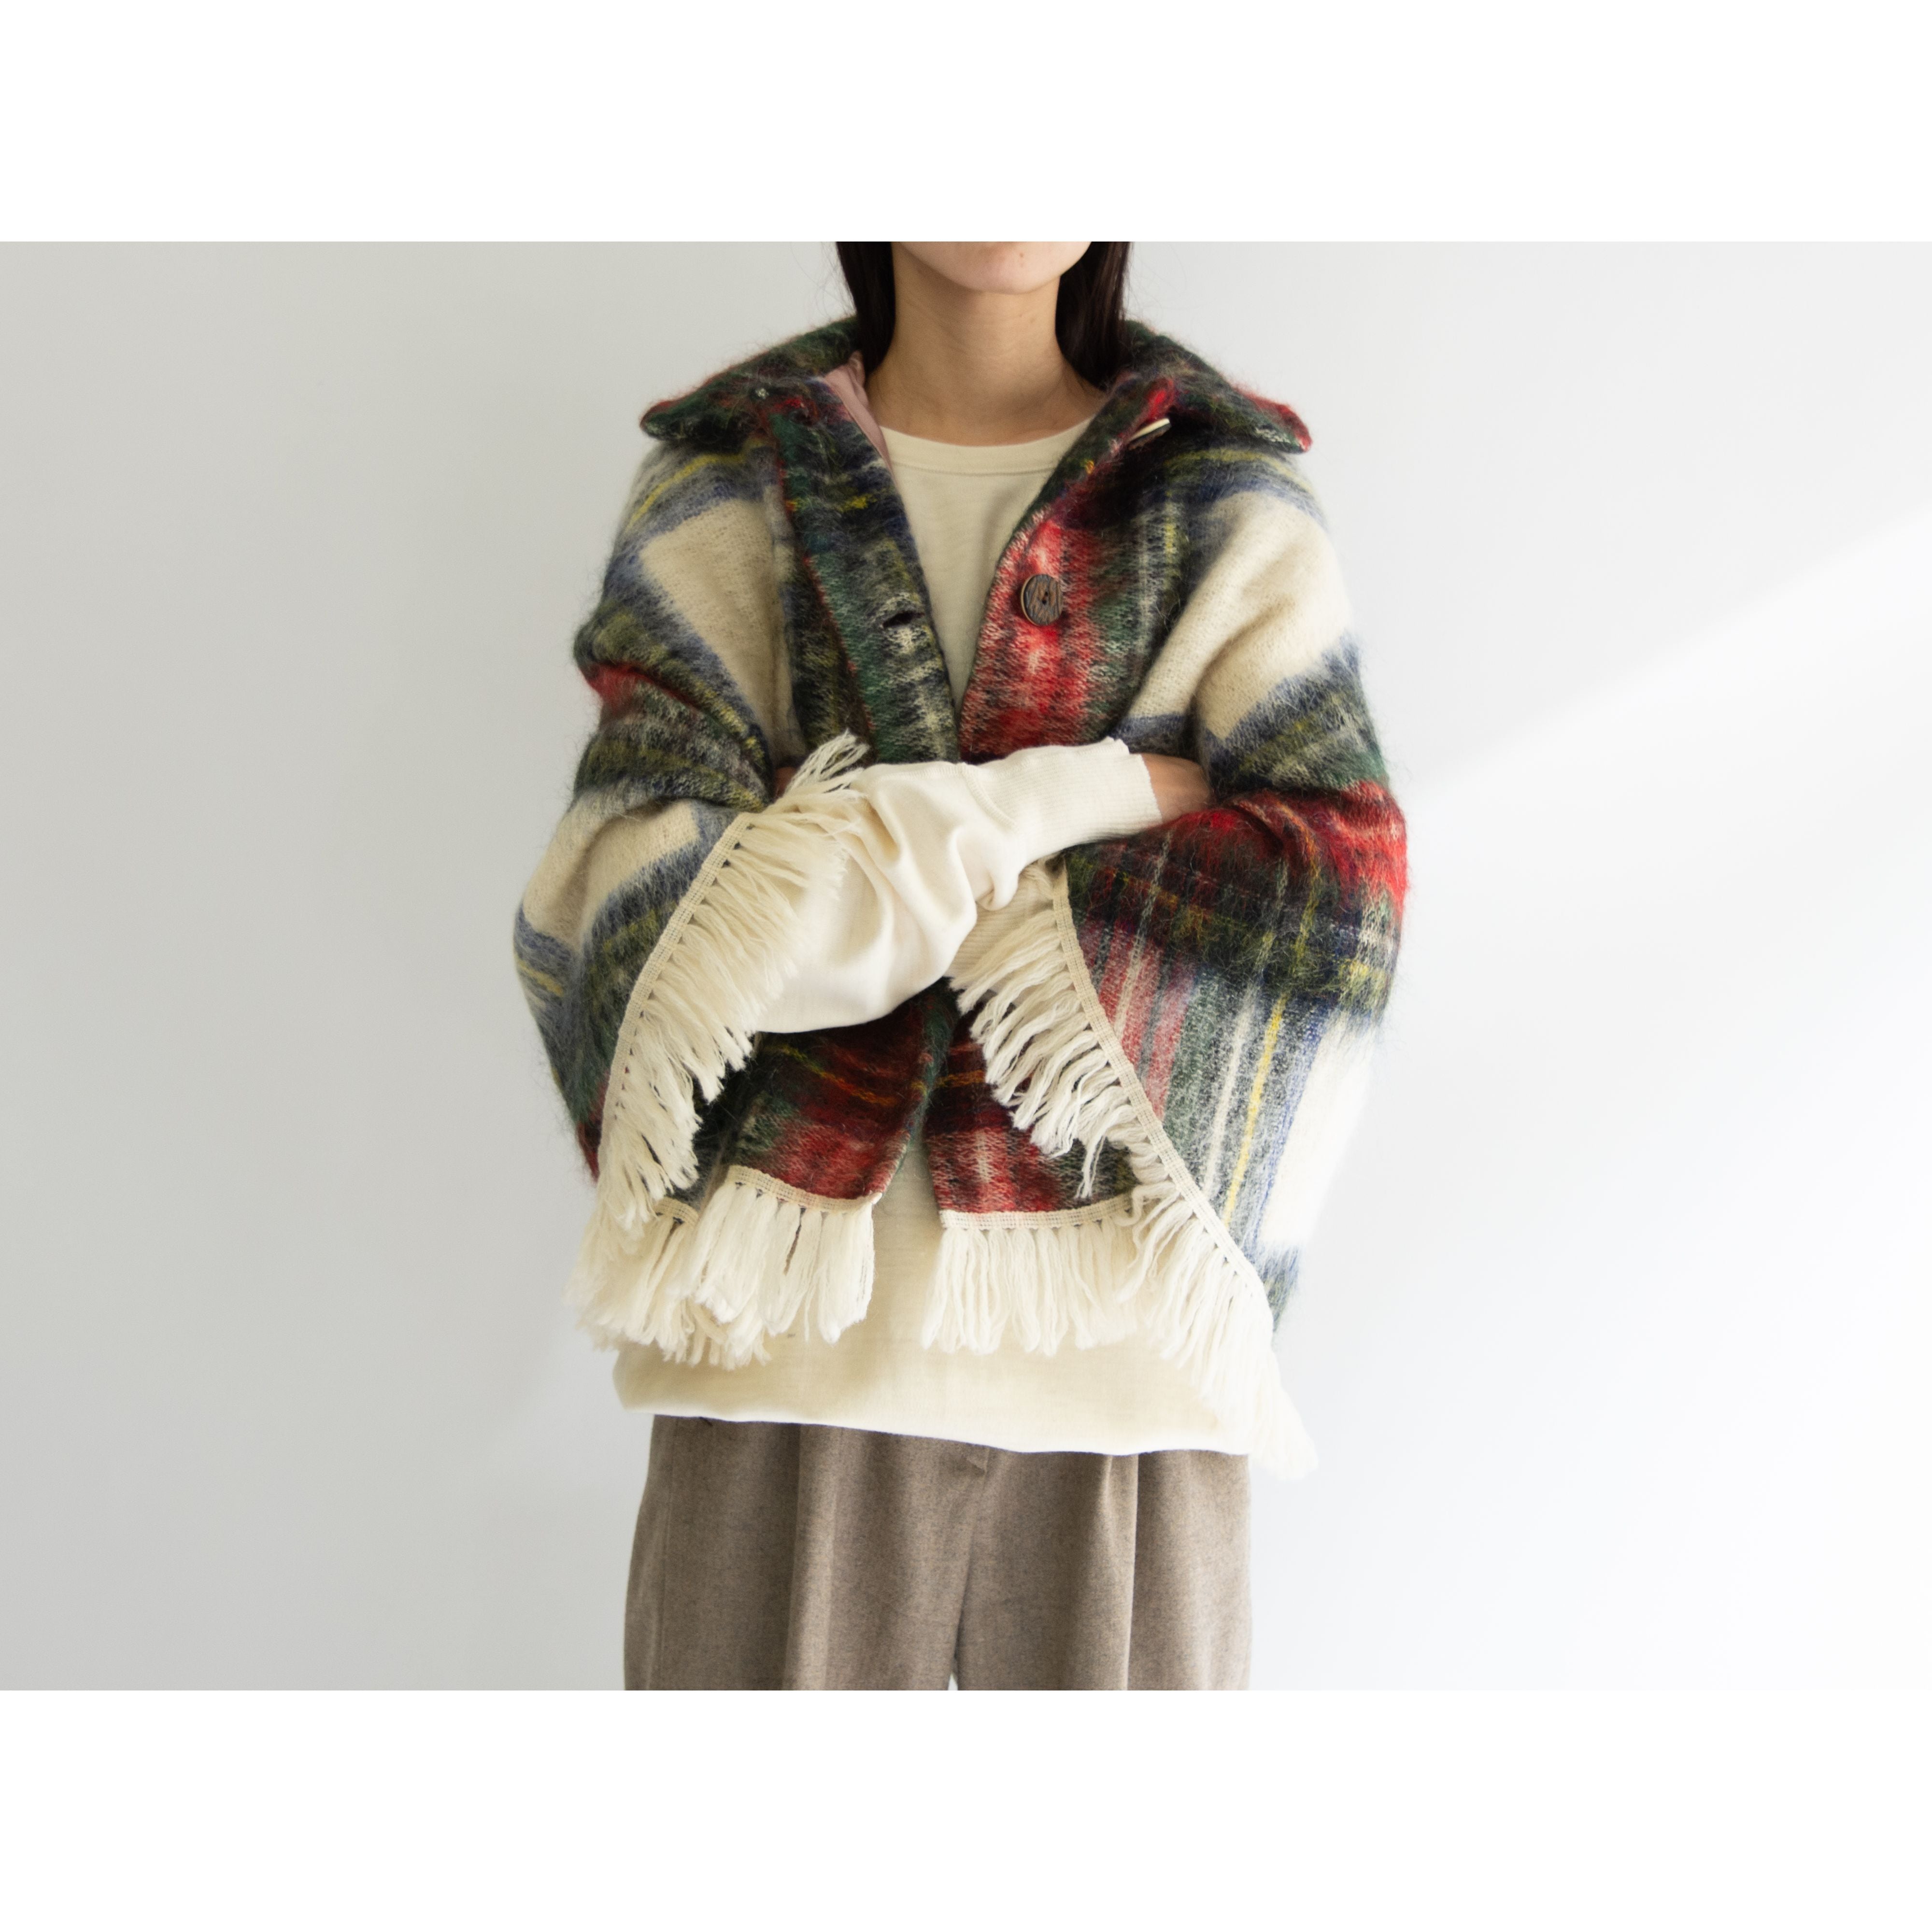 GLEN CREE】Made in Scotland 70-80's Mohair-Wool Cape Coat Poncho